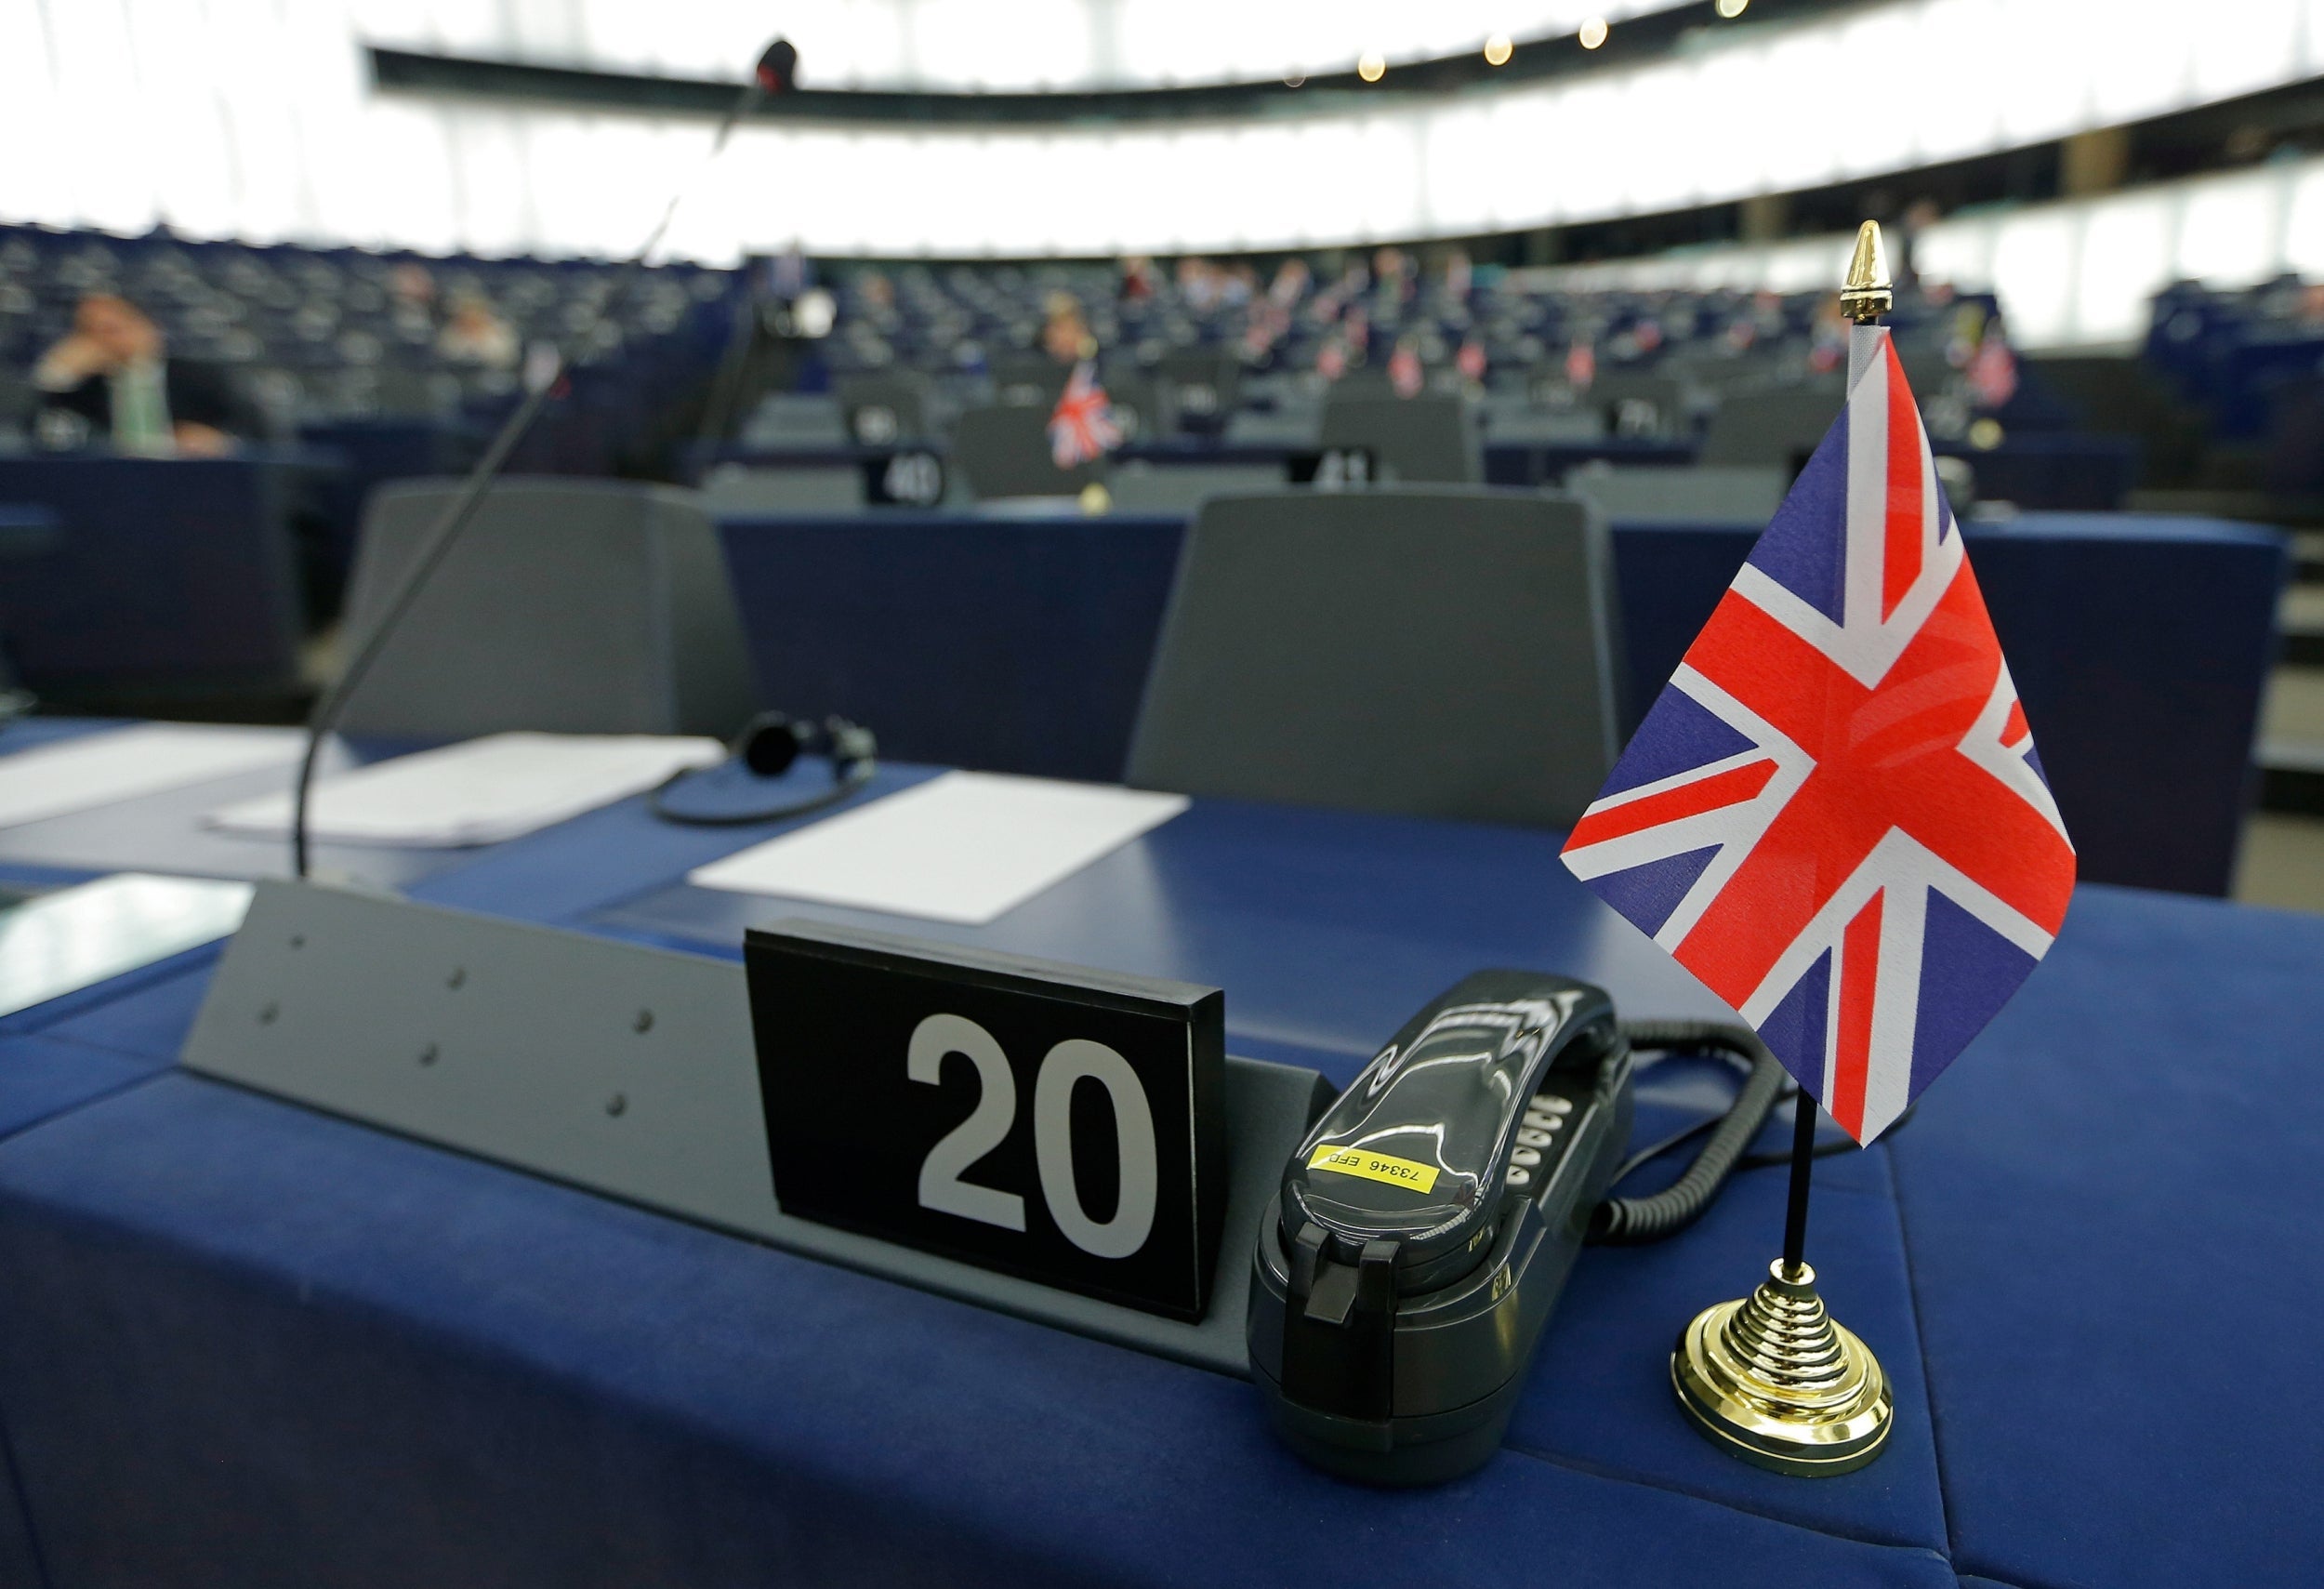 A British flag on a desk in the European parliament in Strasbourg